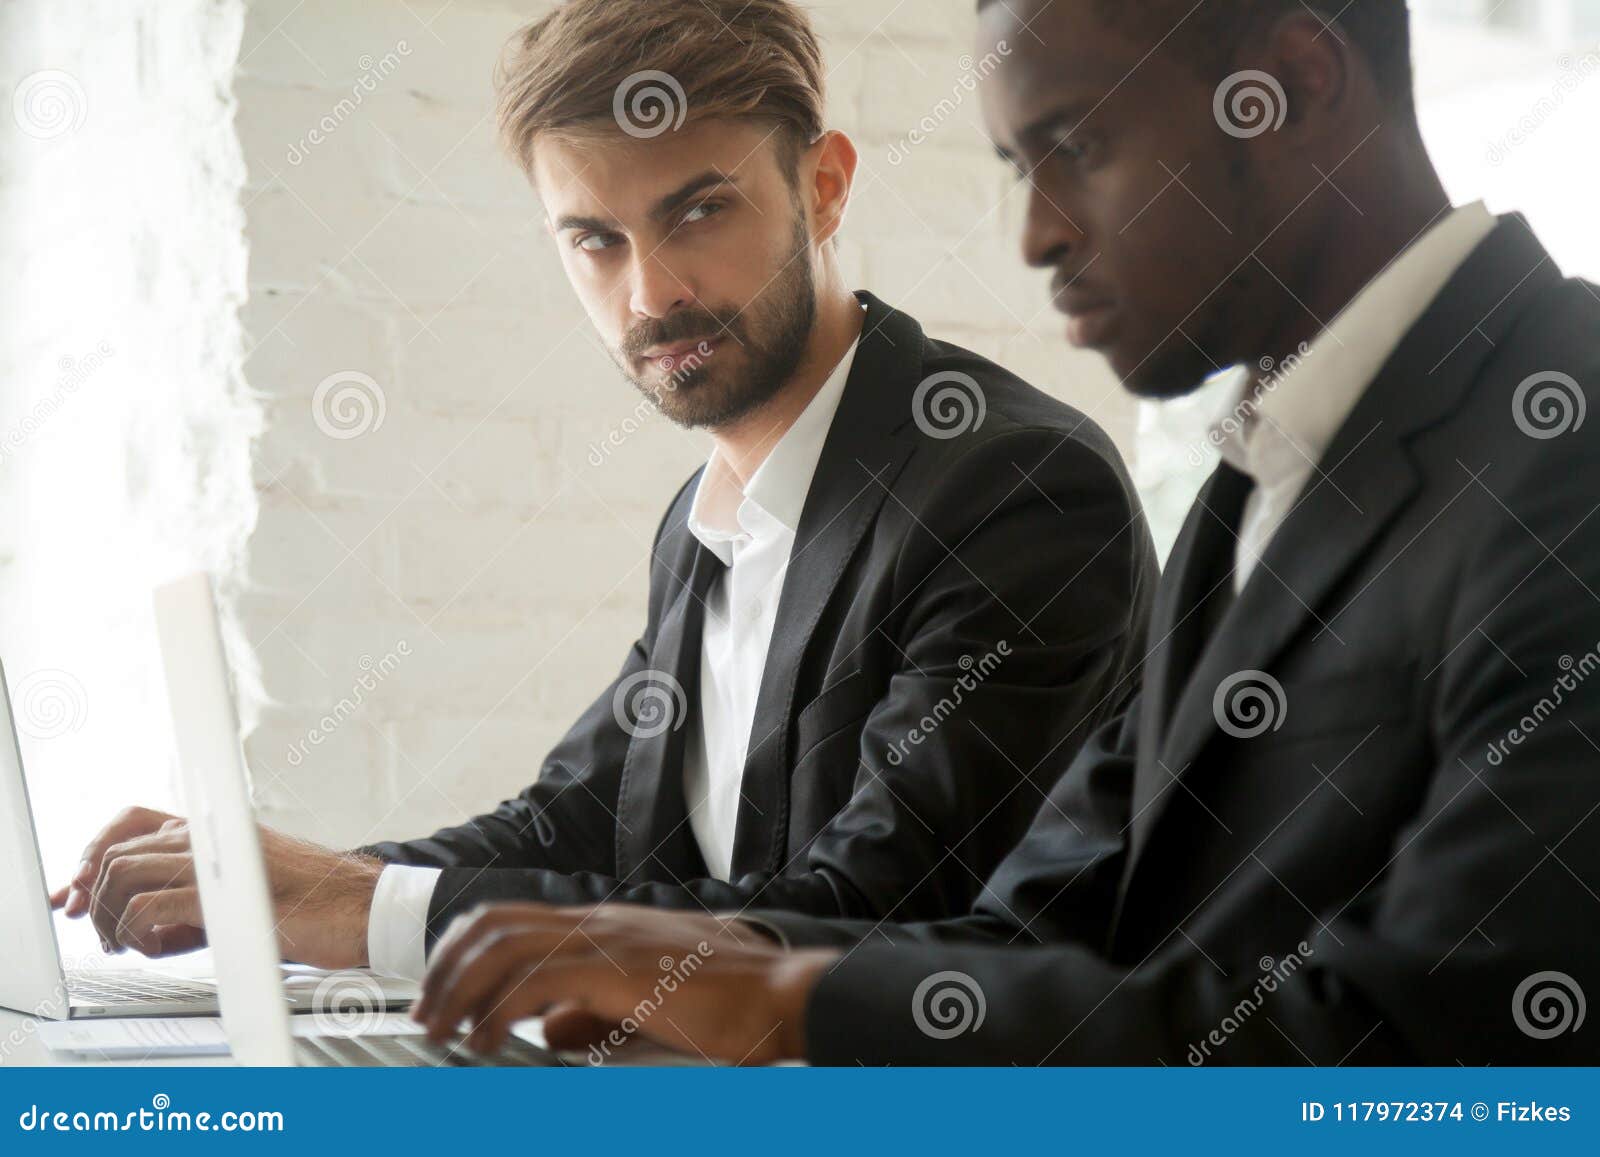 suspicious caucasian worker looking madly at busy black colleagu